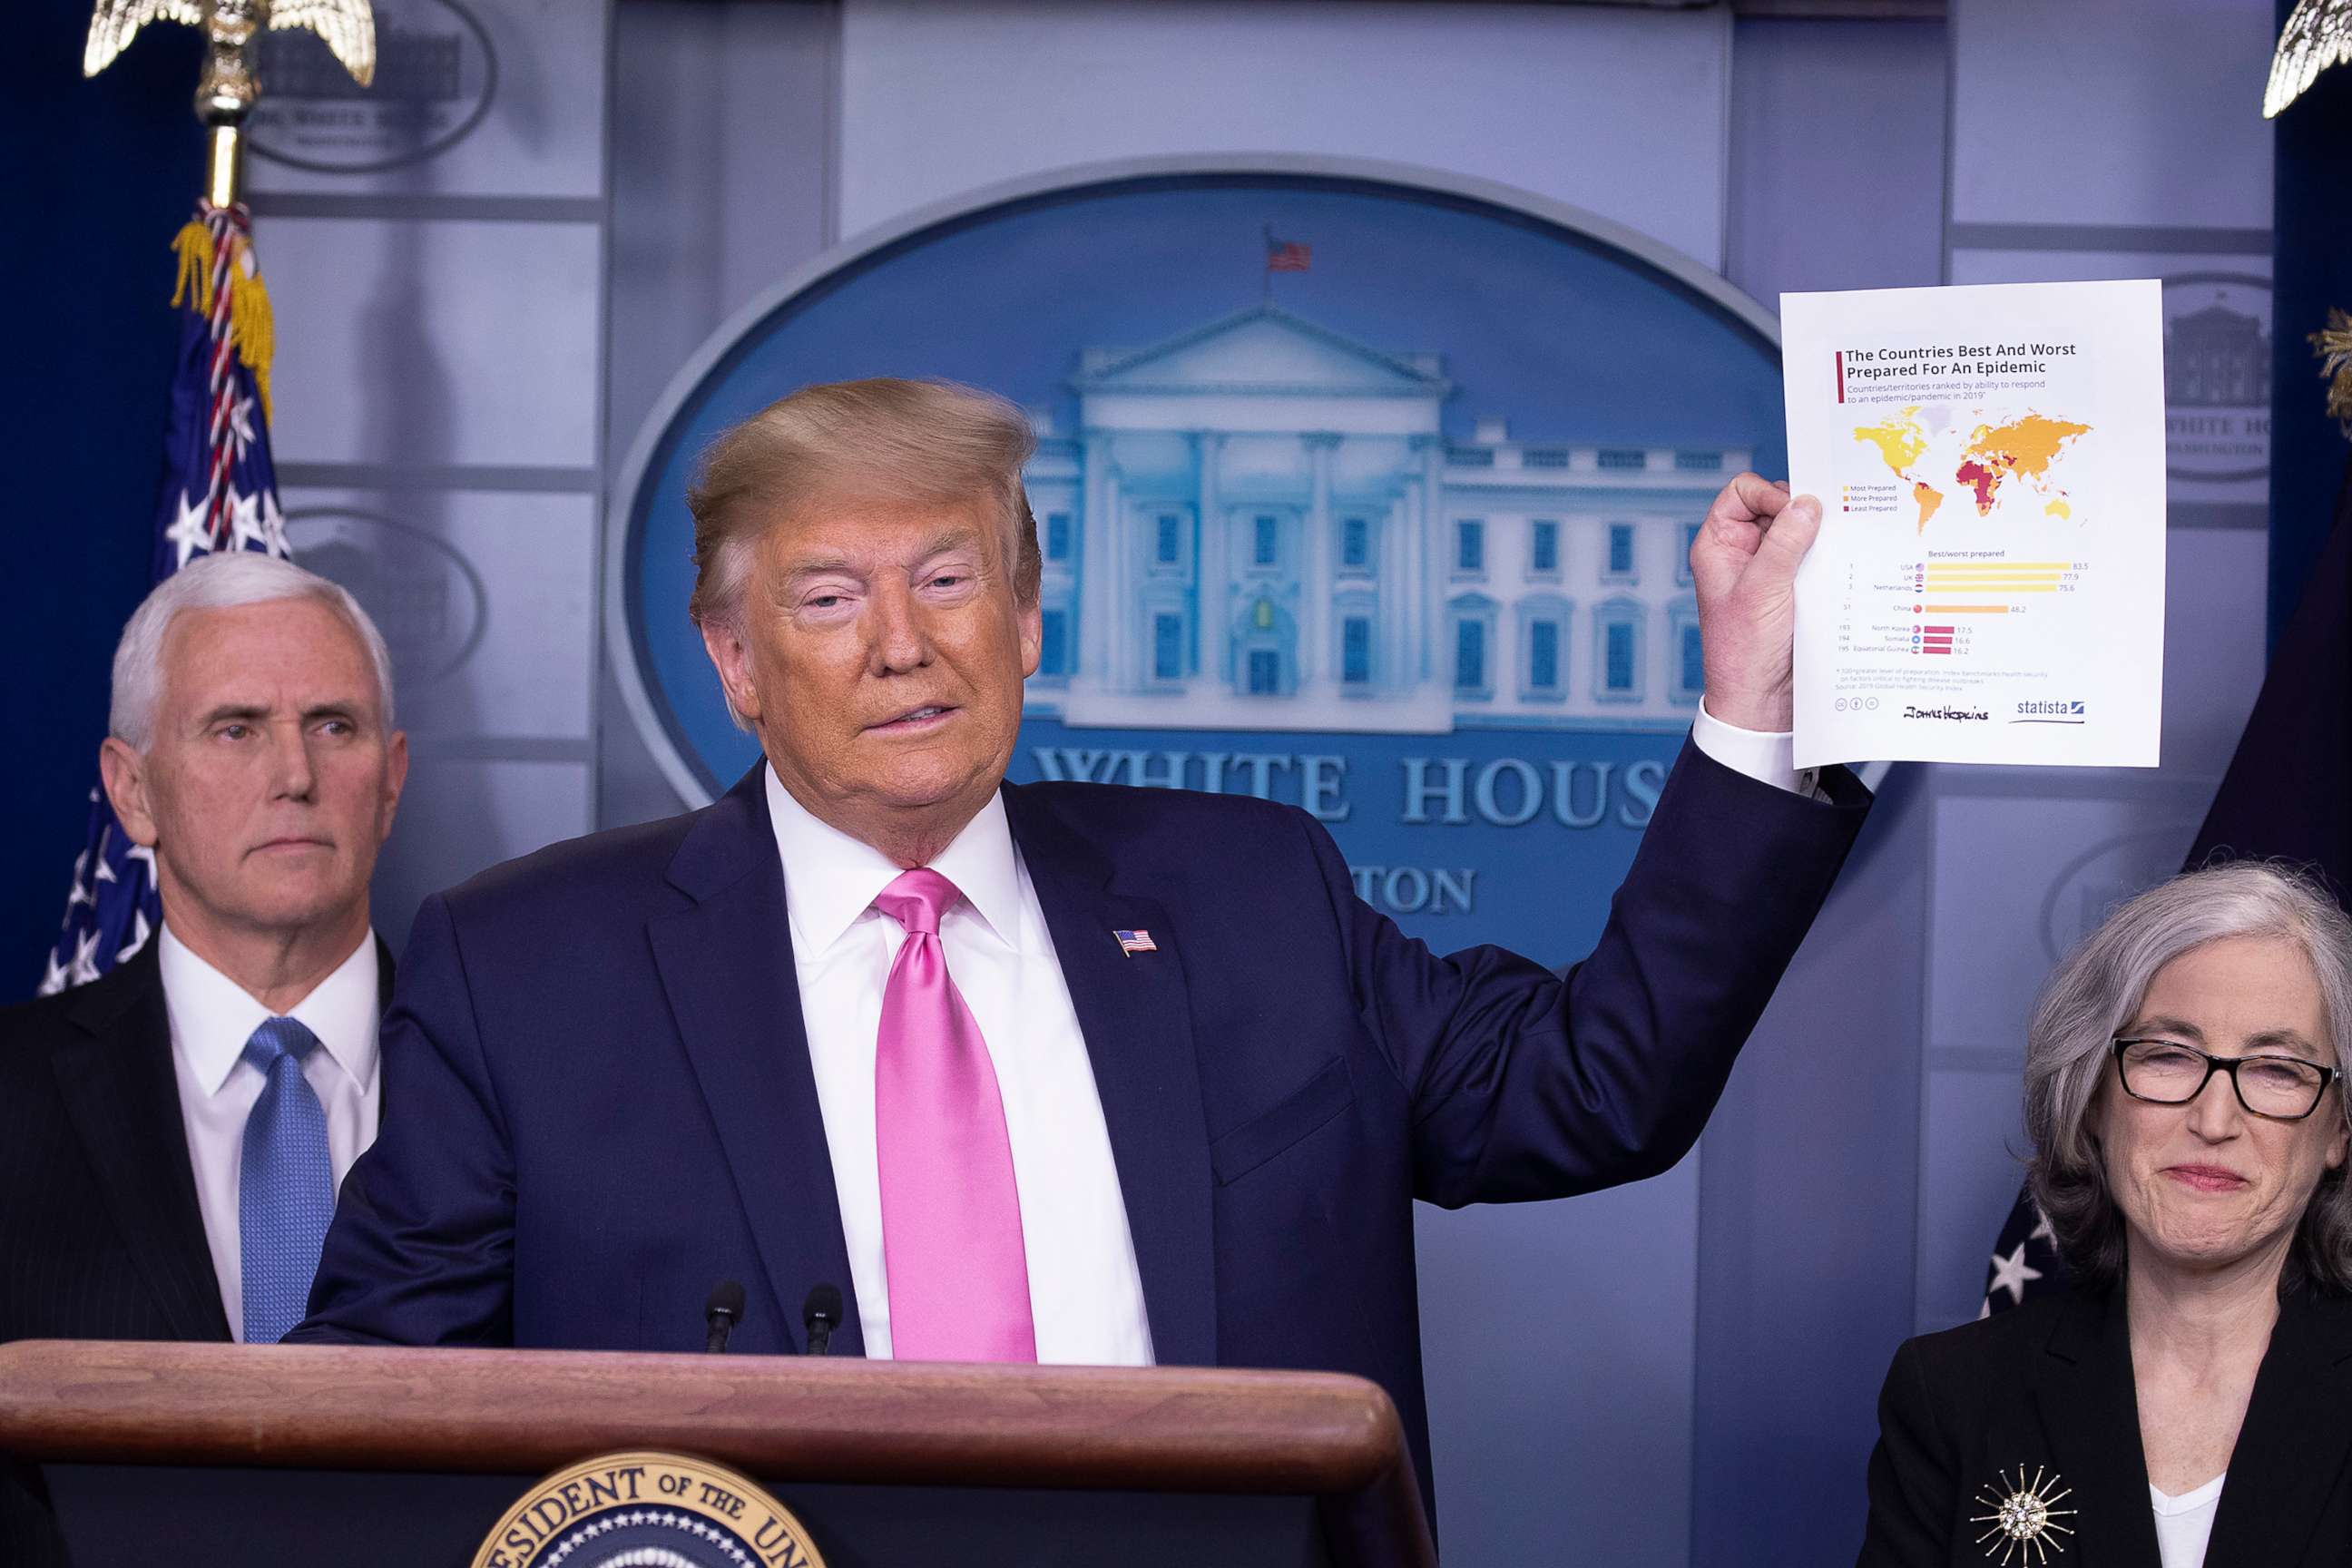 PHOTO:  President Donald Trump holds up a document showing "countries best and worst prepared for an epidemic"  at the beginning of a news conference with members of the coronavirus task force at the White House Feb. 26, 2020.